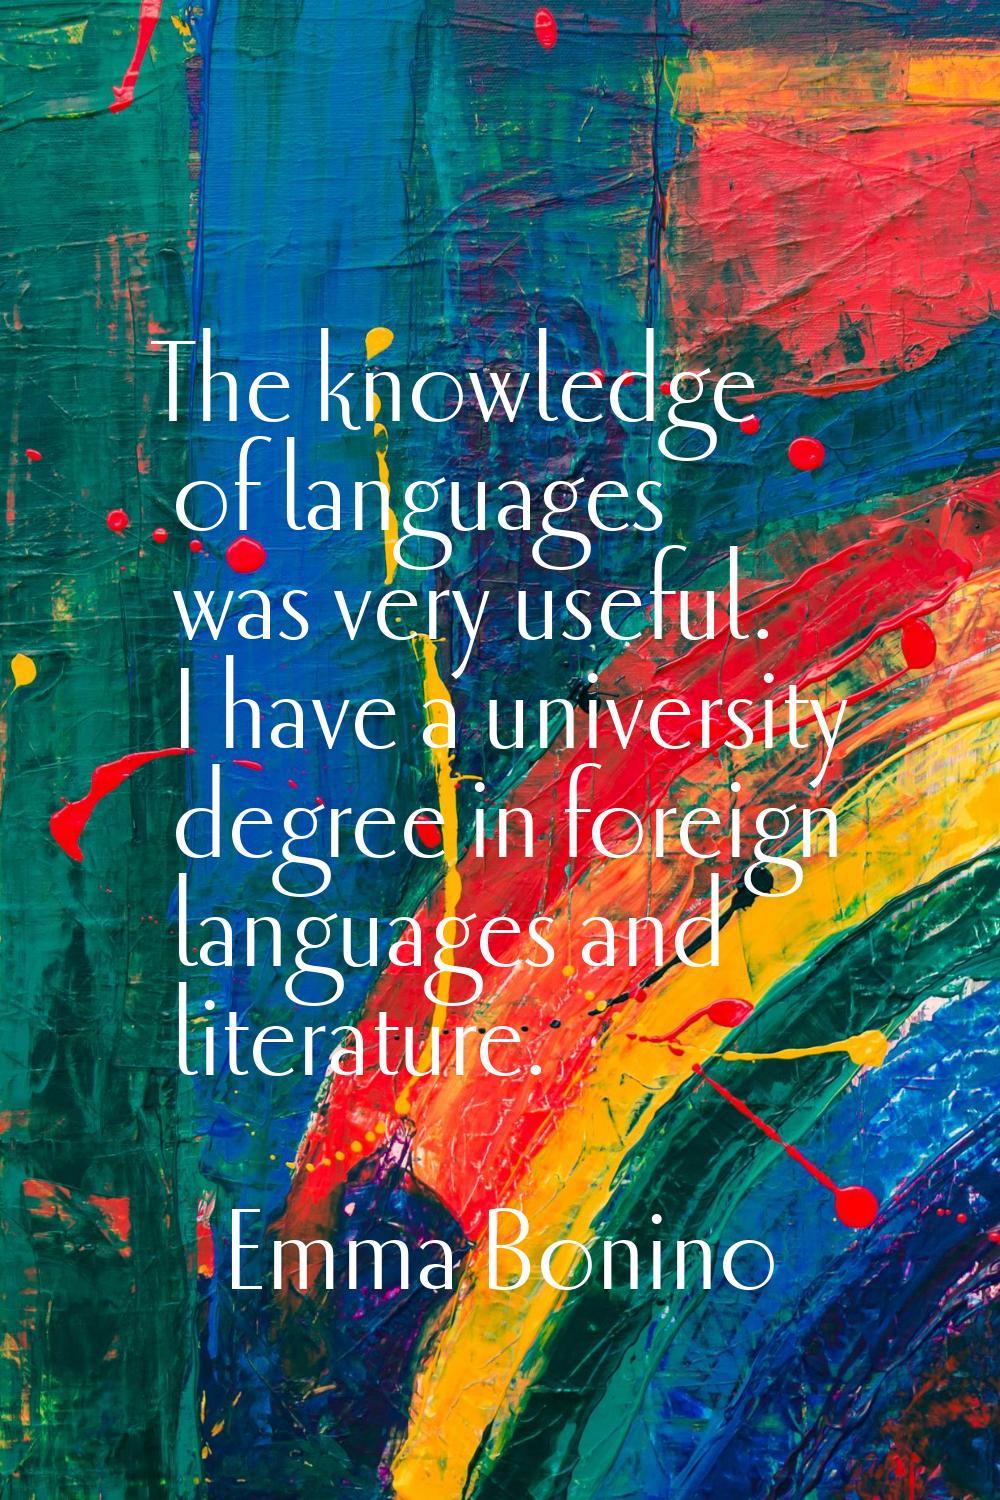 The knowledge of languages was very useful. I have a university degree in foreign languages and lit